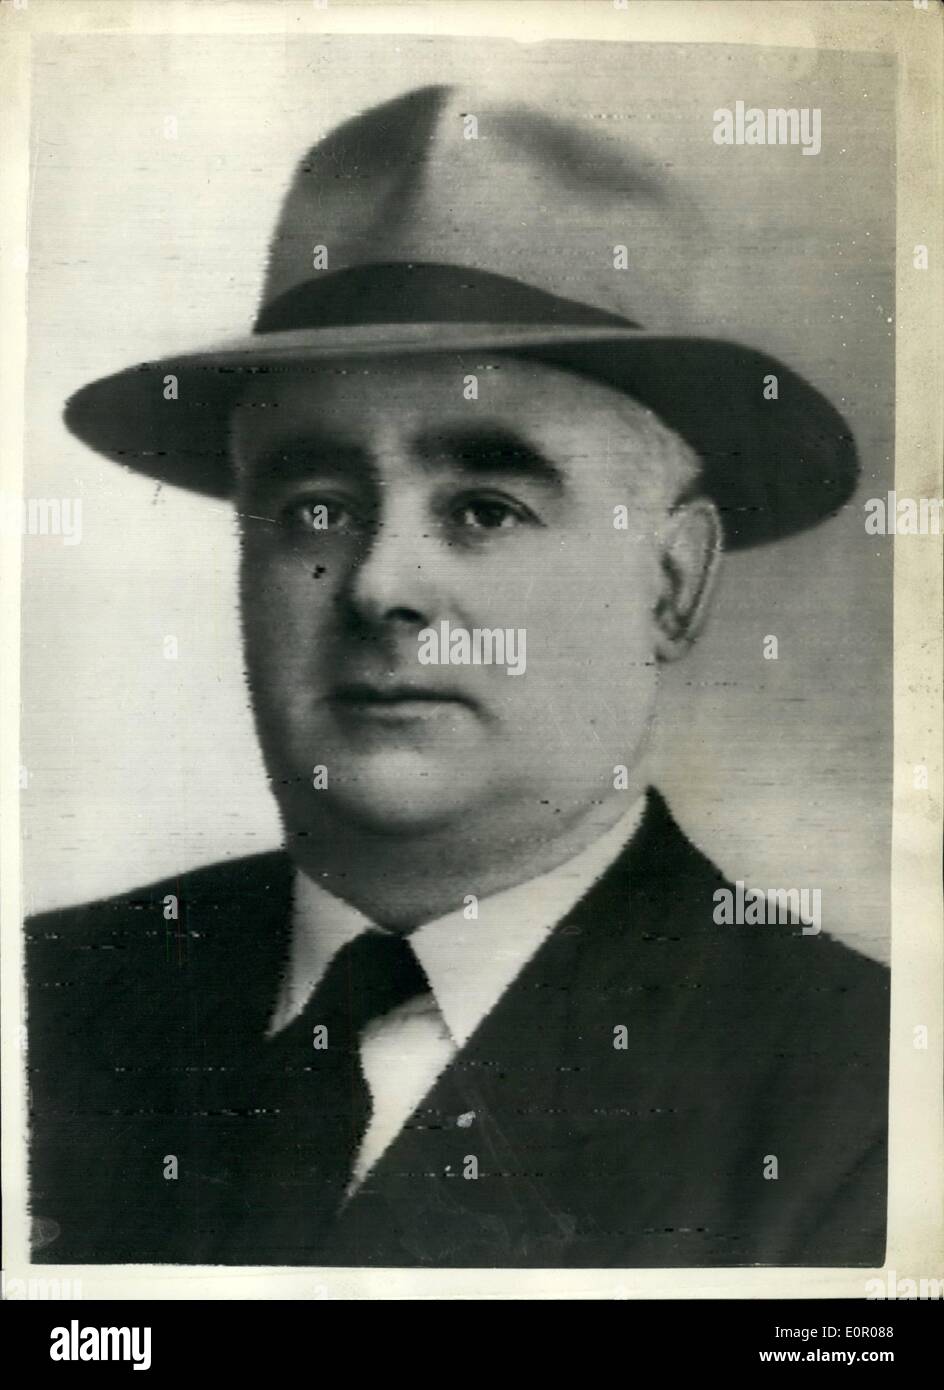 May 24, 1957 - 24-5-57 Man goes berserk with shotgun in Sydney. Kills one, wounds two. Charles Spittiri, a Maltese migrant went berserk with a shotgun in Sydney, Australia, shooting dead a man, wounding a woman and a detective, then fell dead from a bullet from the wounded policeman's gun. The crazy gunman was at bay in a house for six hours. Photo Shows: Charles Spittiri, the Maltese migrant who went berserk with a shotgun. Stock Photo